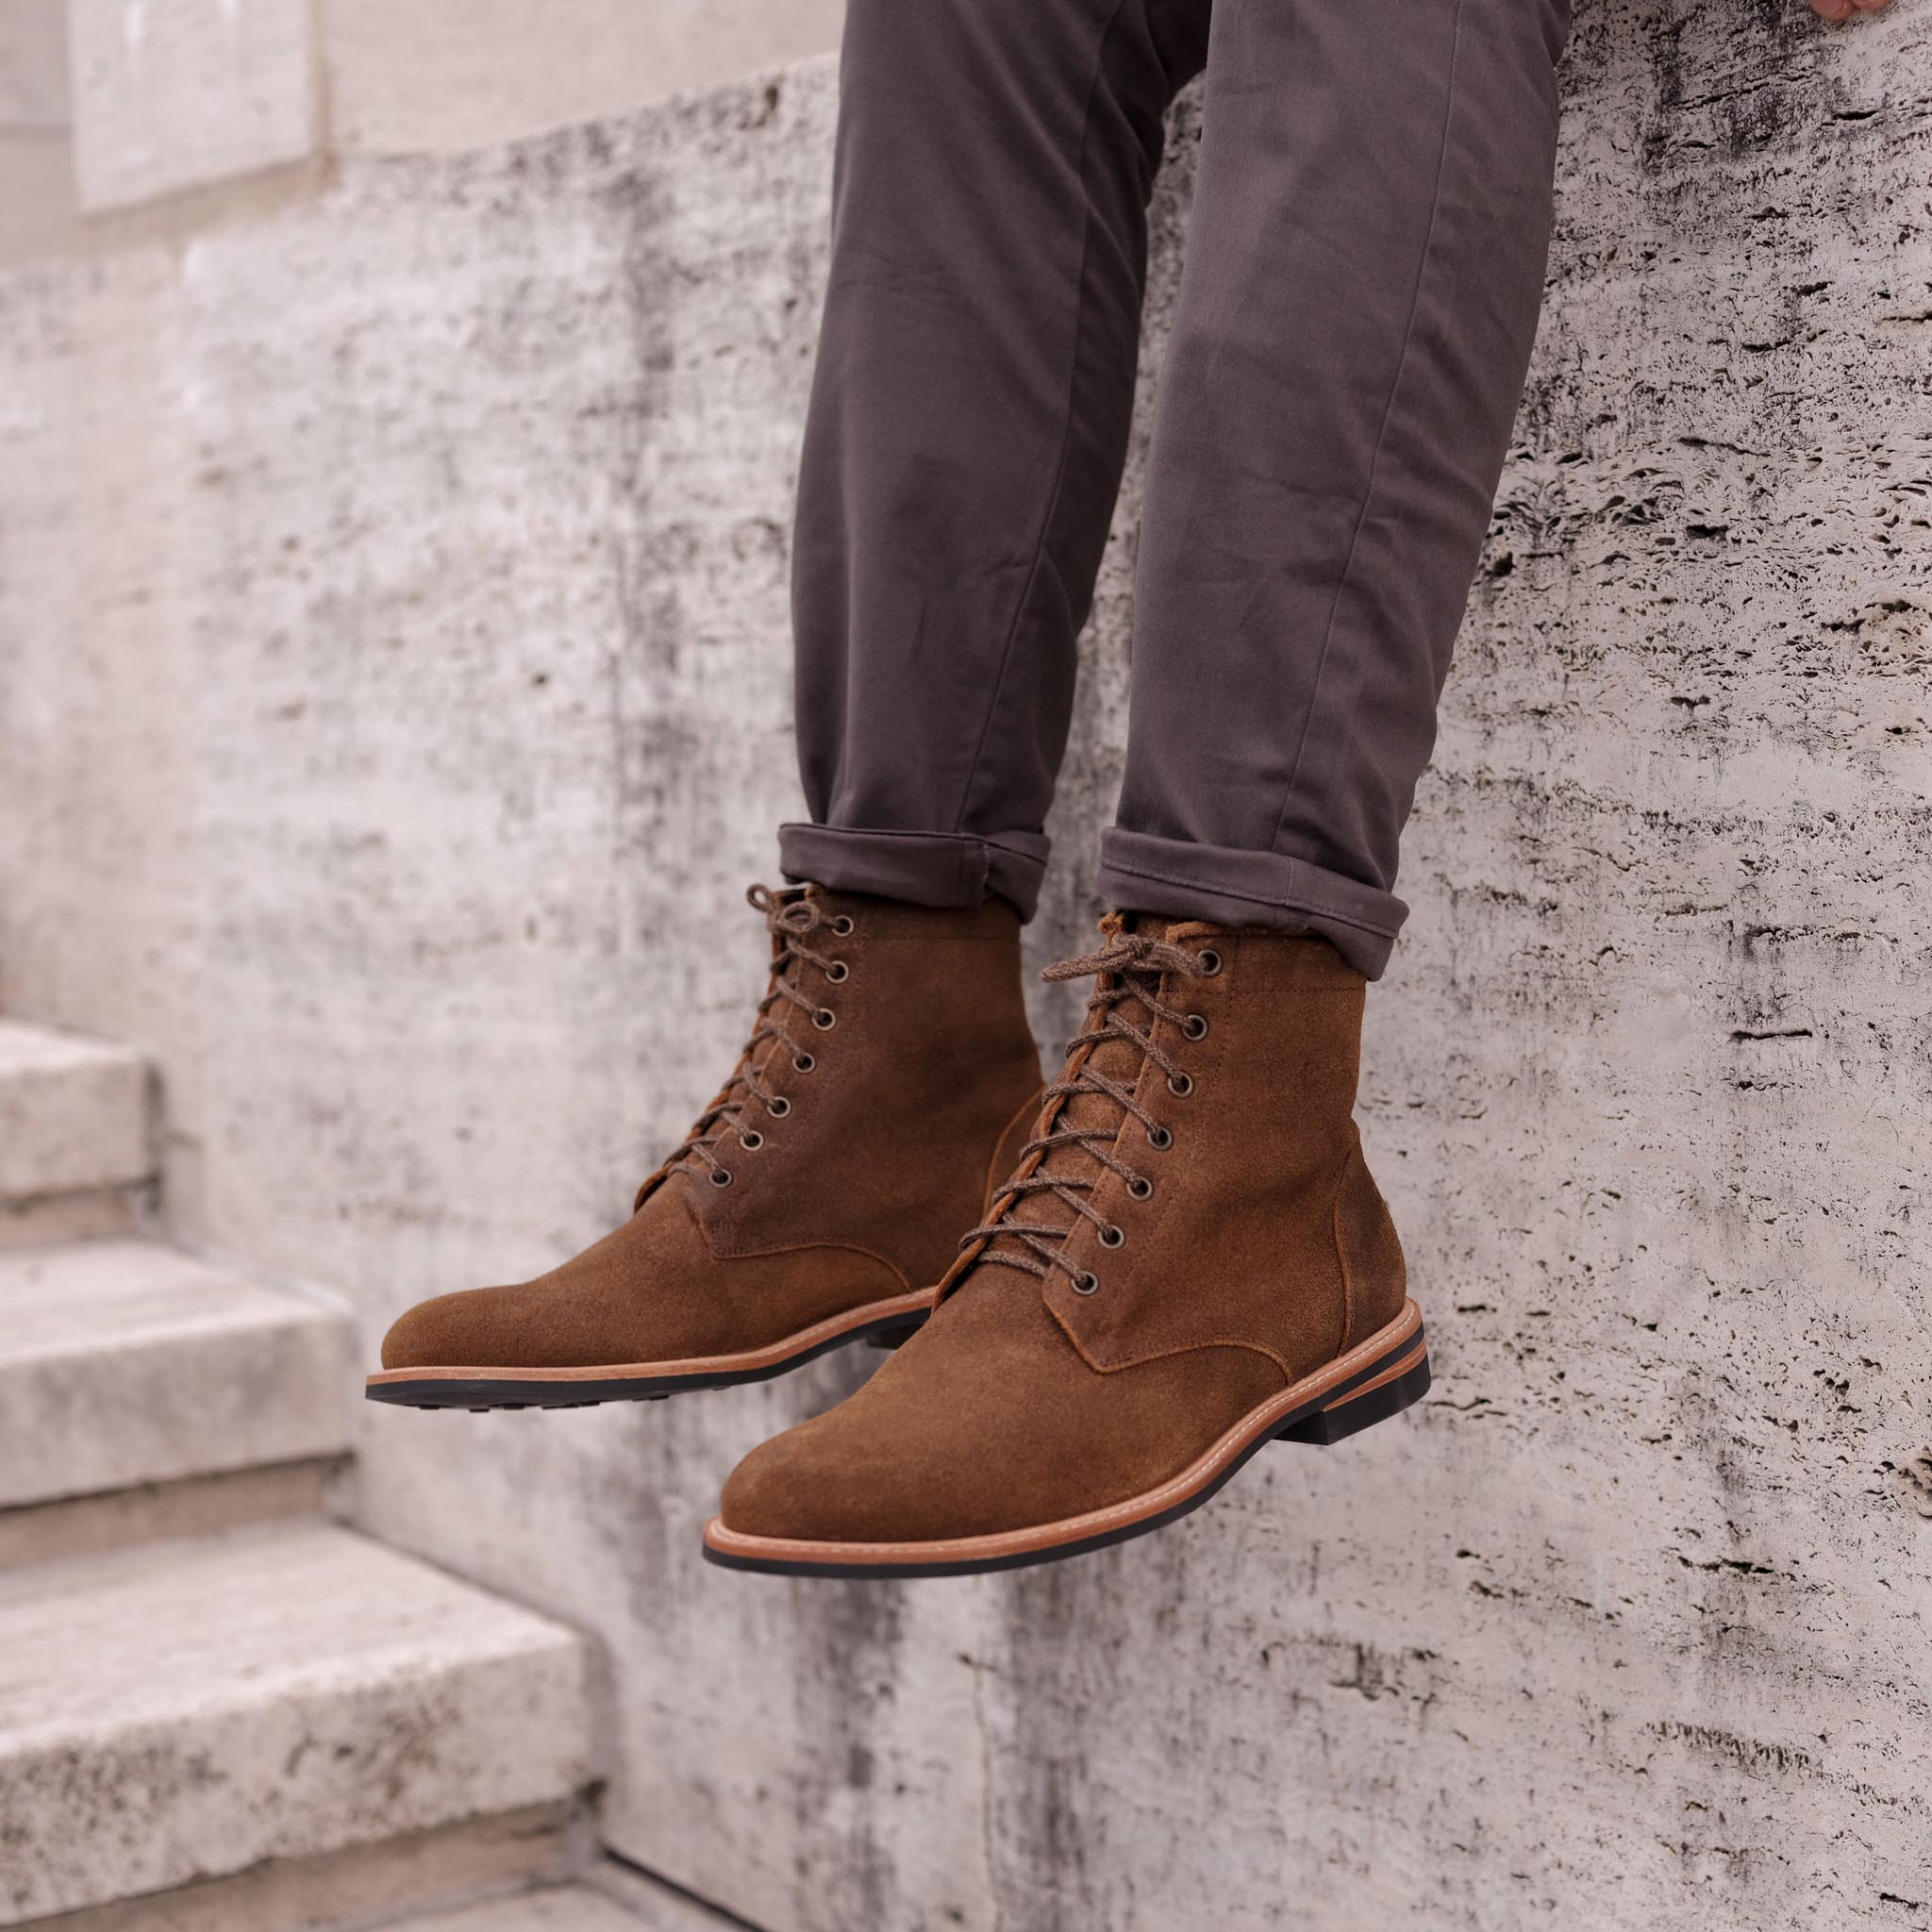 All-Weather Andres Waxed Boots